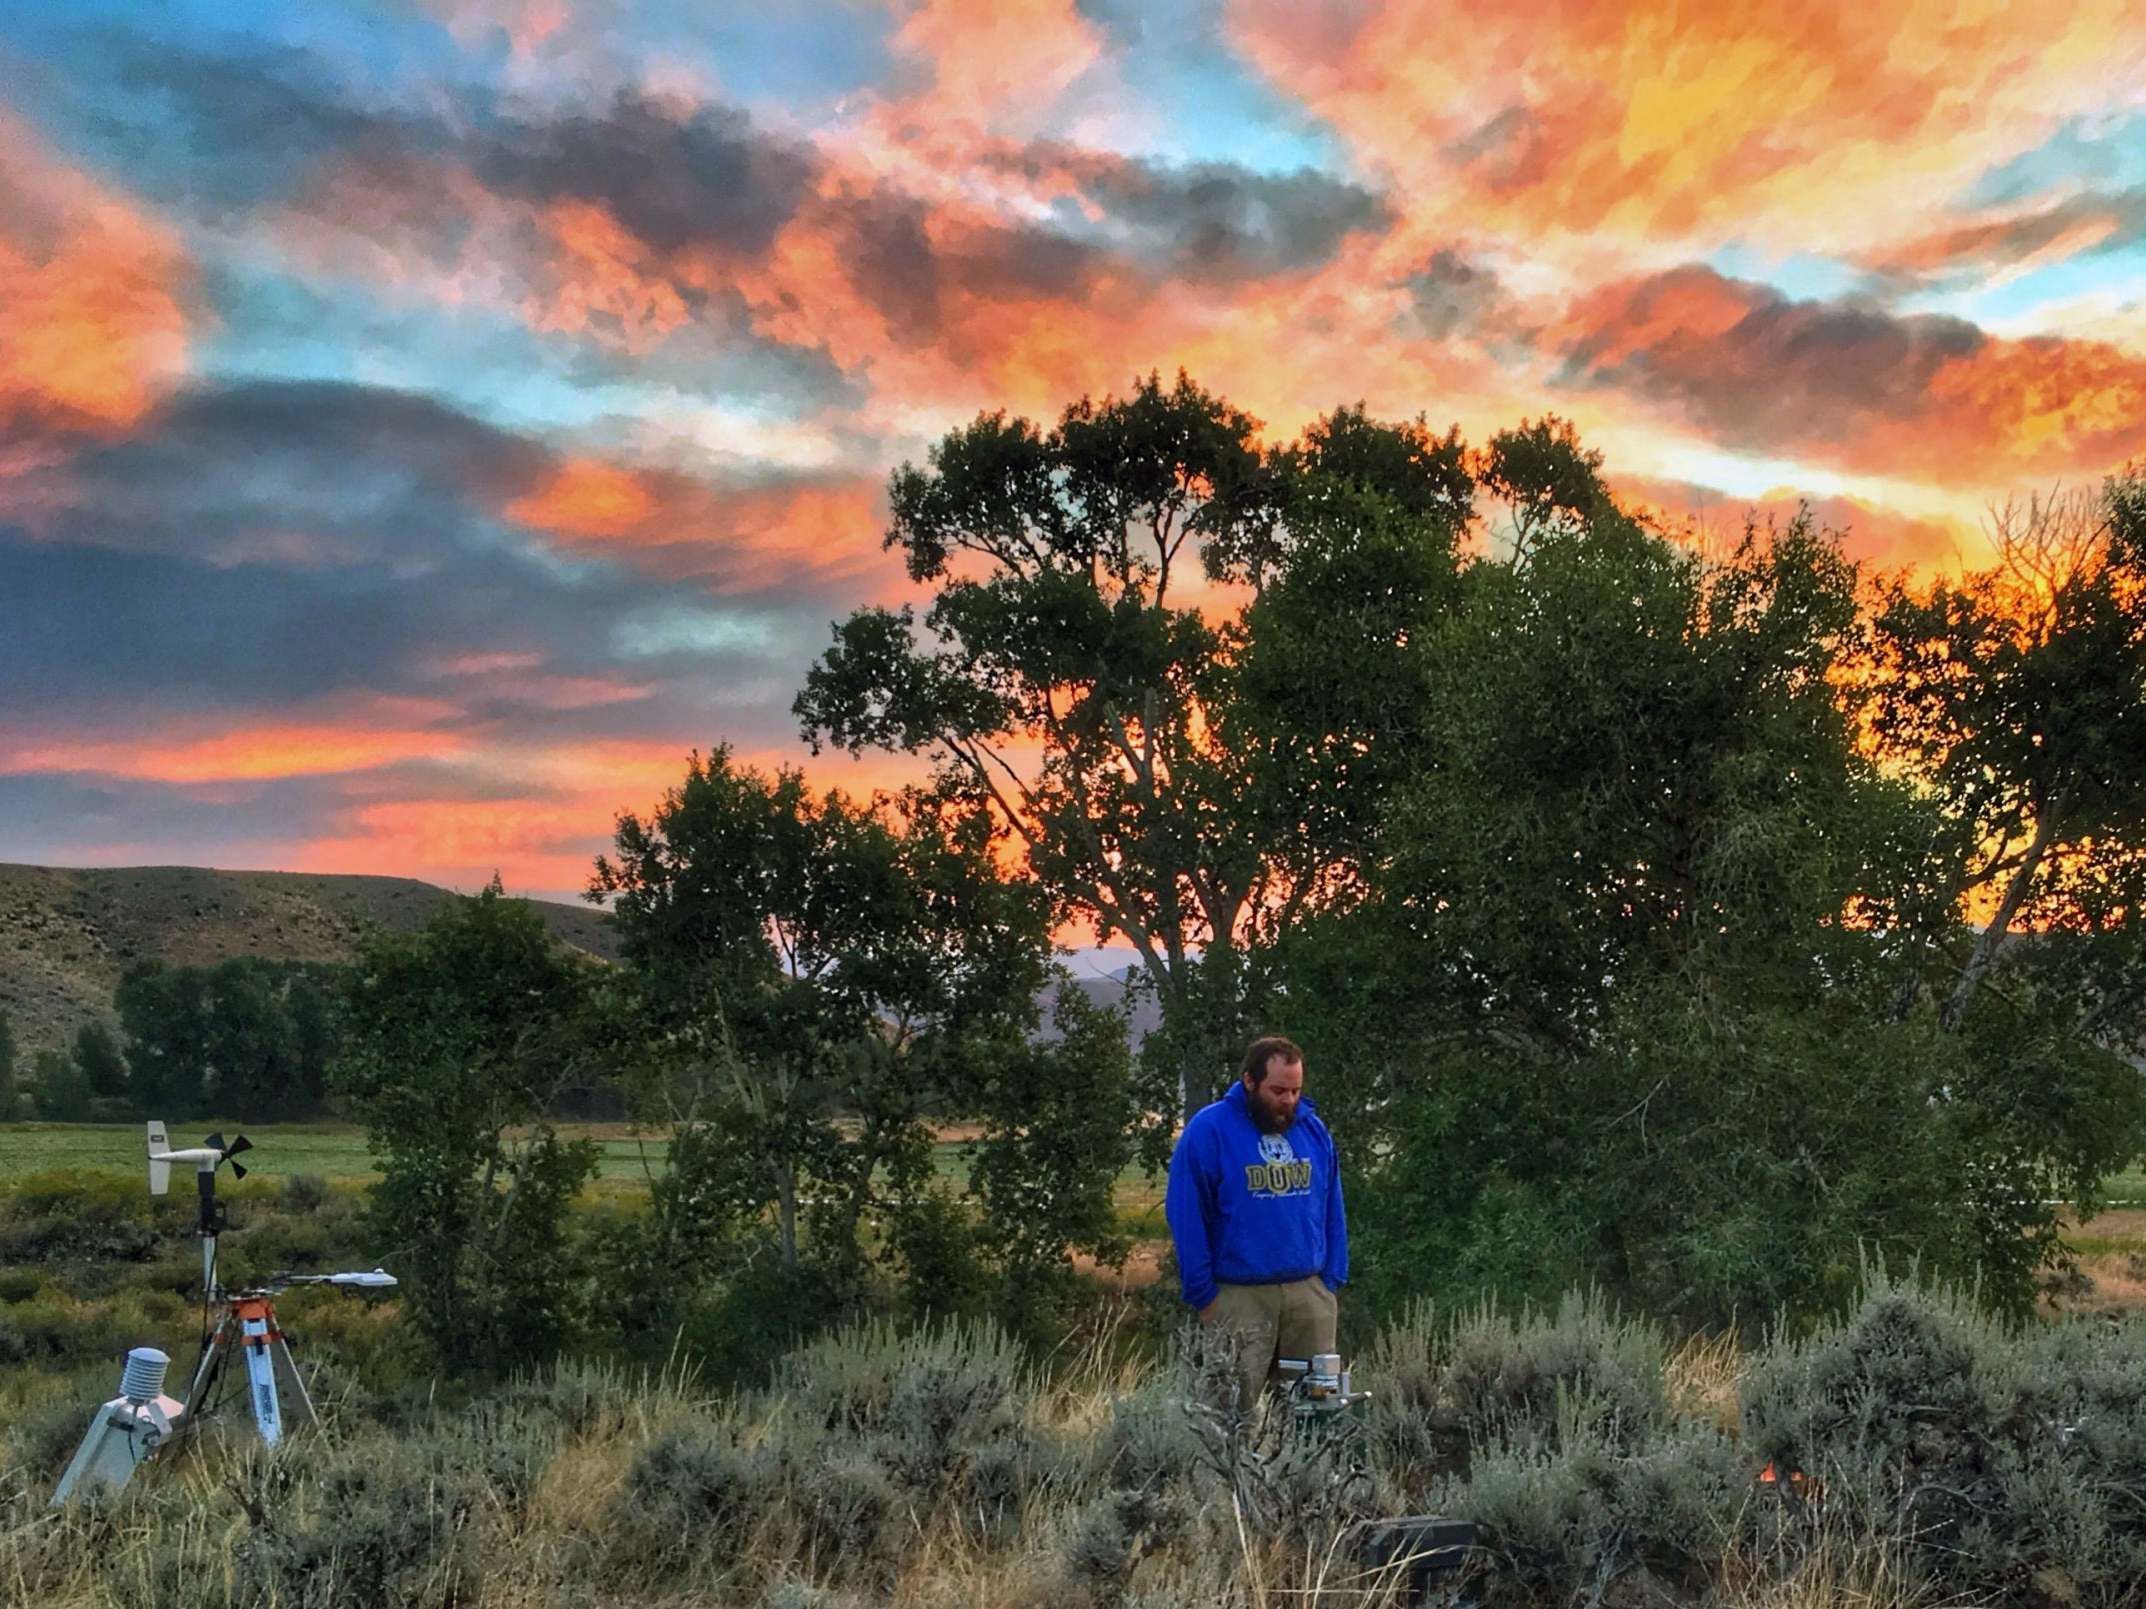 Daniel Beverly, a PhD candidate at the University of Wyoming, checks on sagebrush and instruments at sunrise near Yellowstone National Park